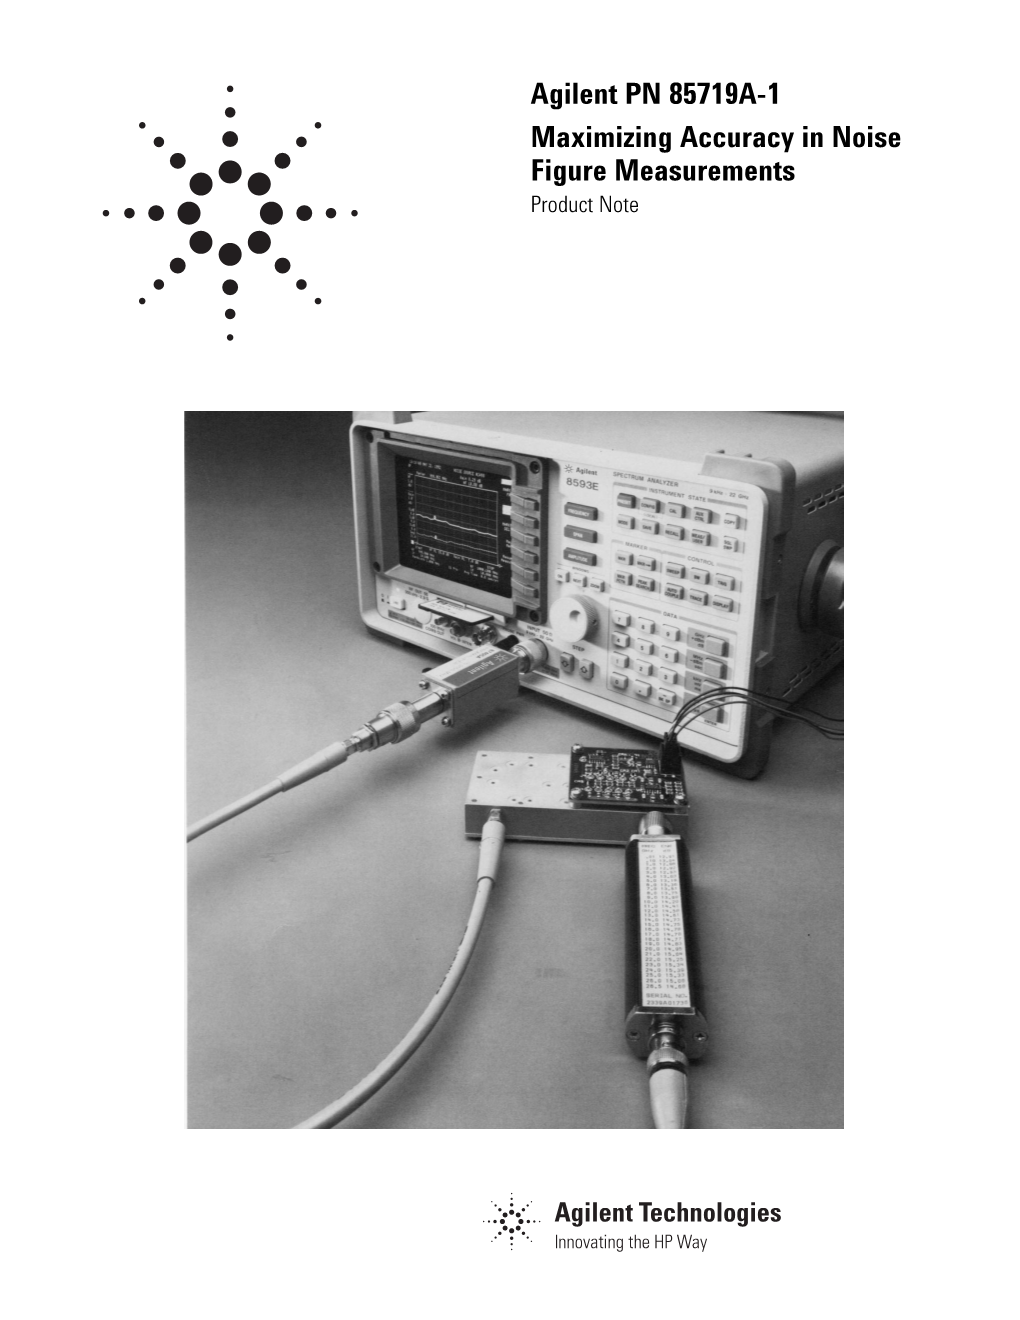 Agilent PN 85719A-1 Maximizing Accuracy in Noise Figure Measurements Product Note Table of Contents